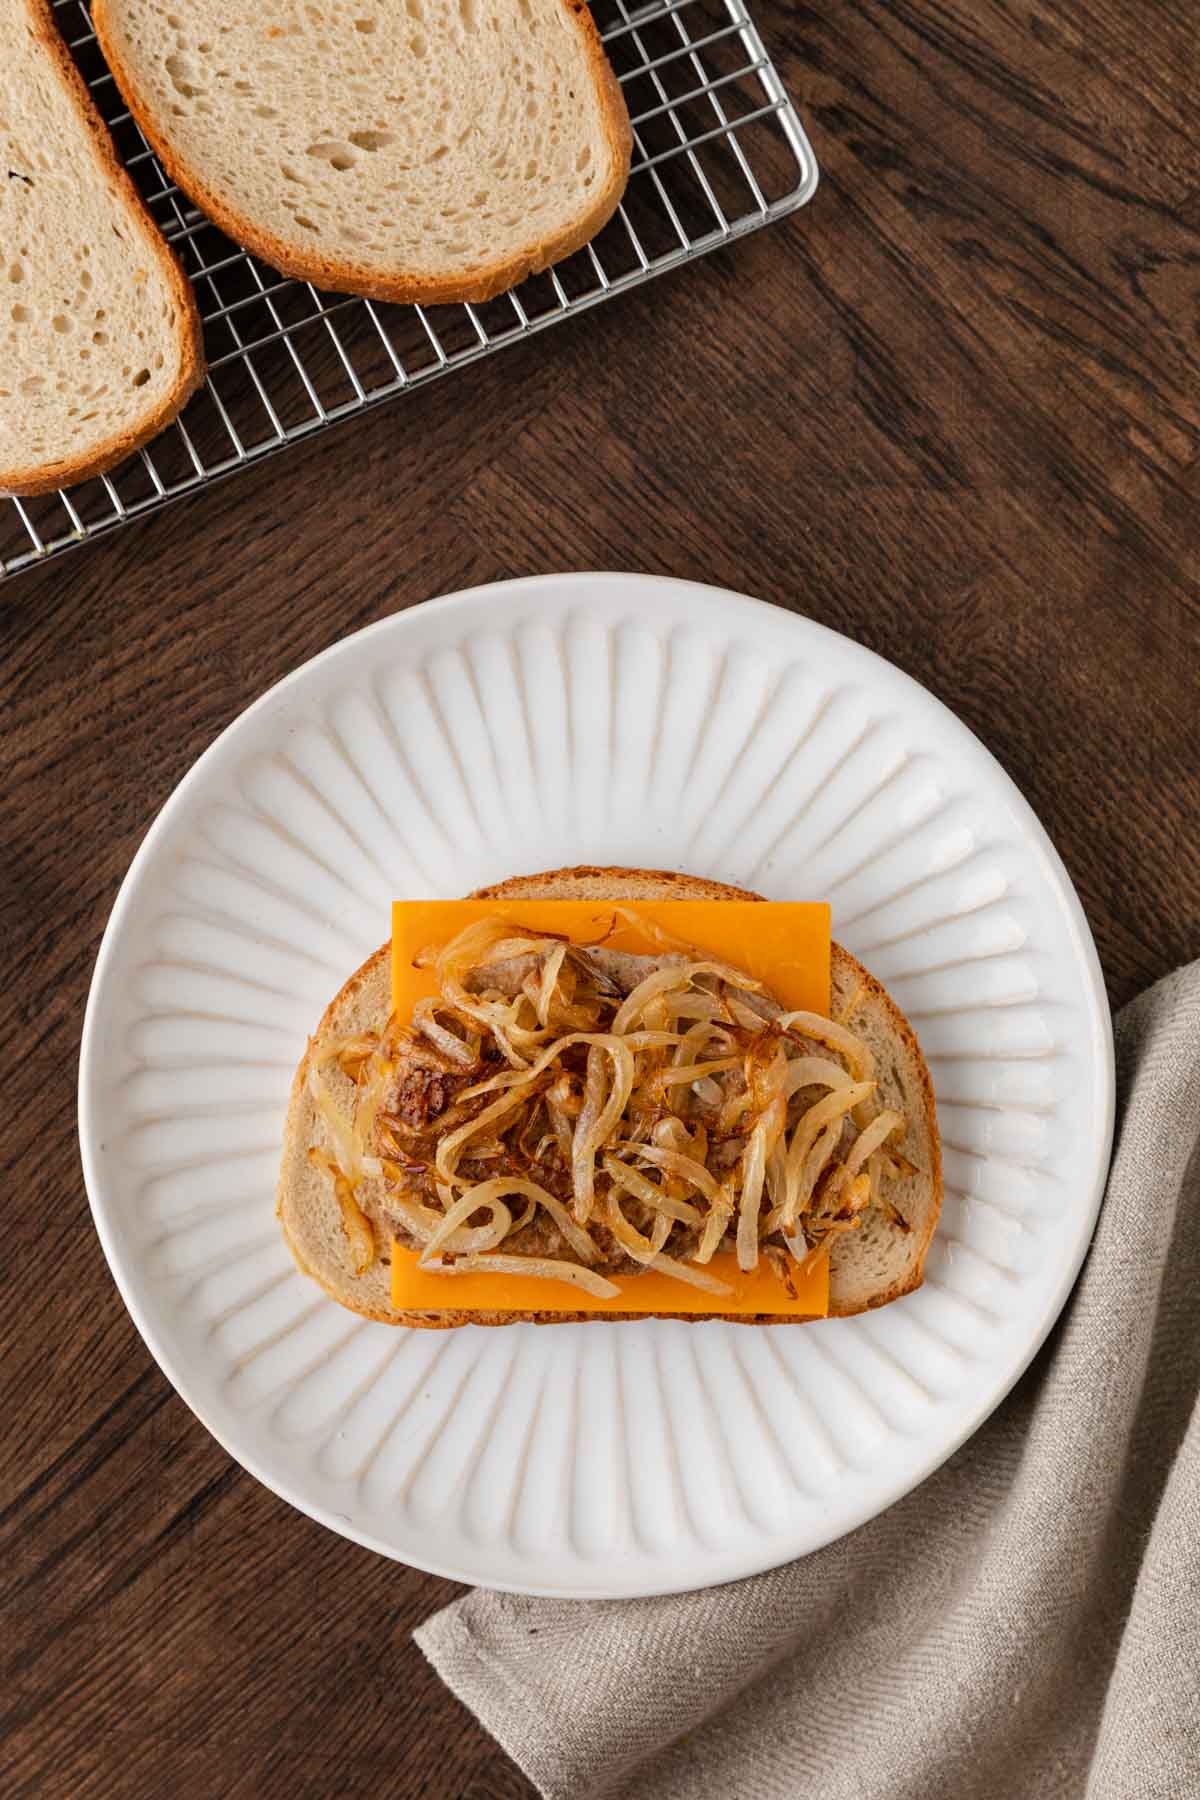 slice of bread with cheese and turkey patty and fried onions